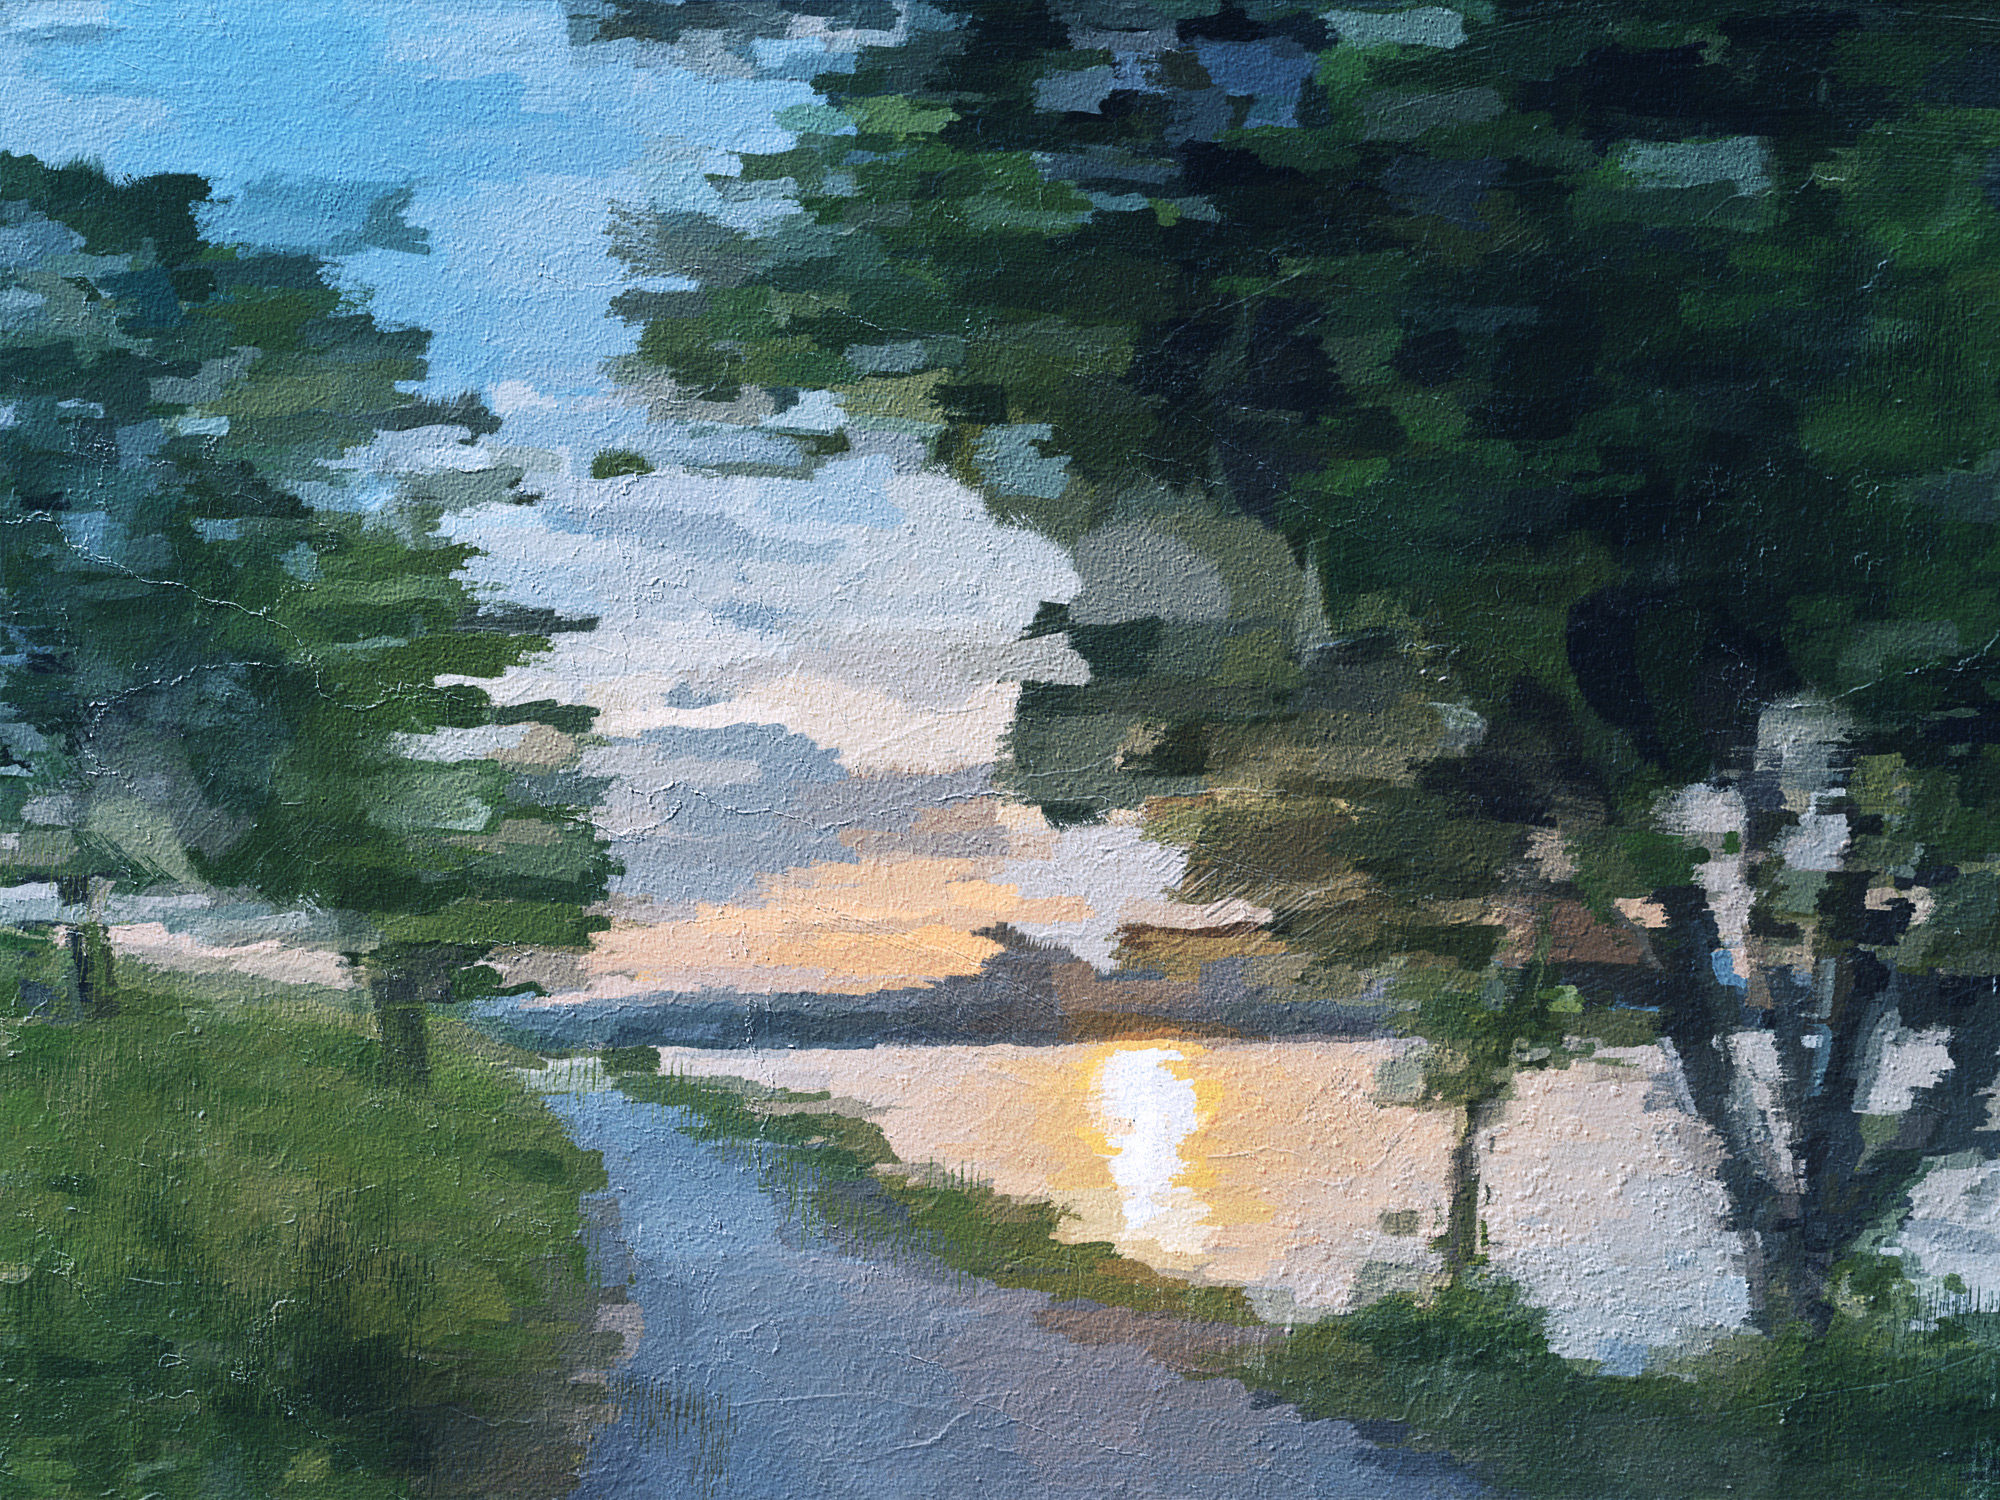 A Monet inspired impressionist painting. We stand on a curving path next to the water, trees rising beside us. The sun is setting off in the distance behind the shadows that allude to a city. It is the "golden hour" when sunlight bathes so purely across the skies.